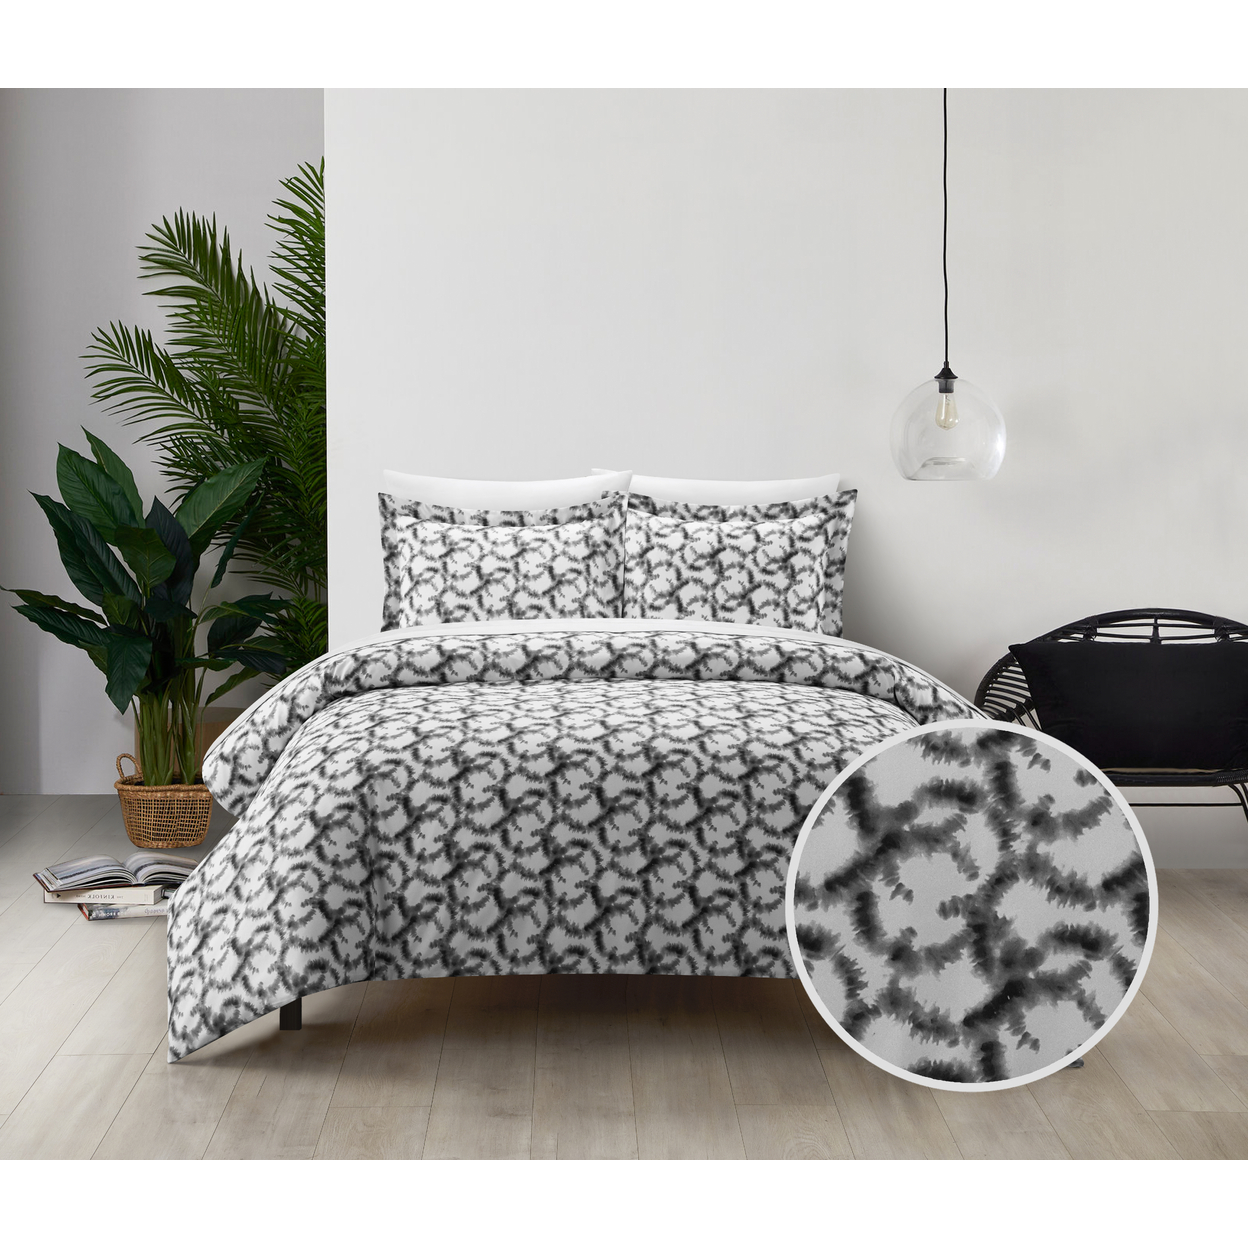 Khrissie 2 Or 3 Piece Duvet Cover Set Watercolor Overlapping Rings Pattern - Grey, King